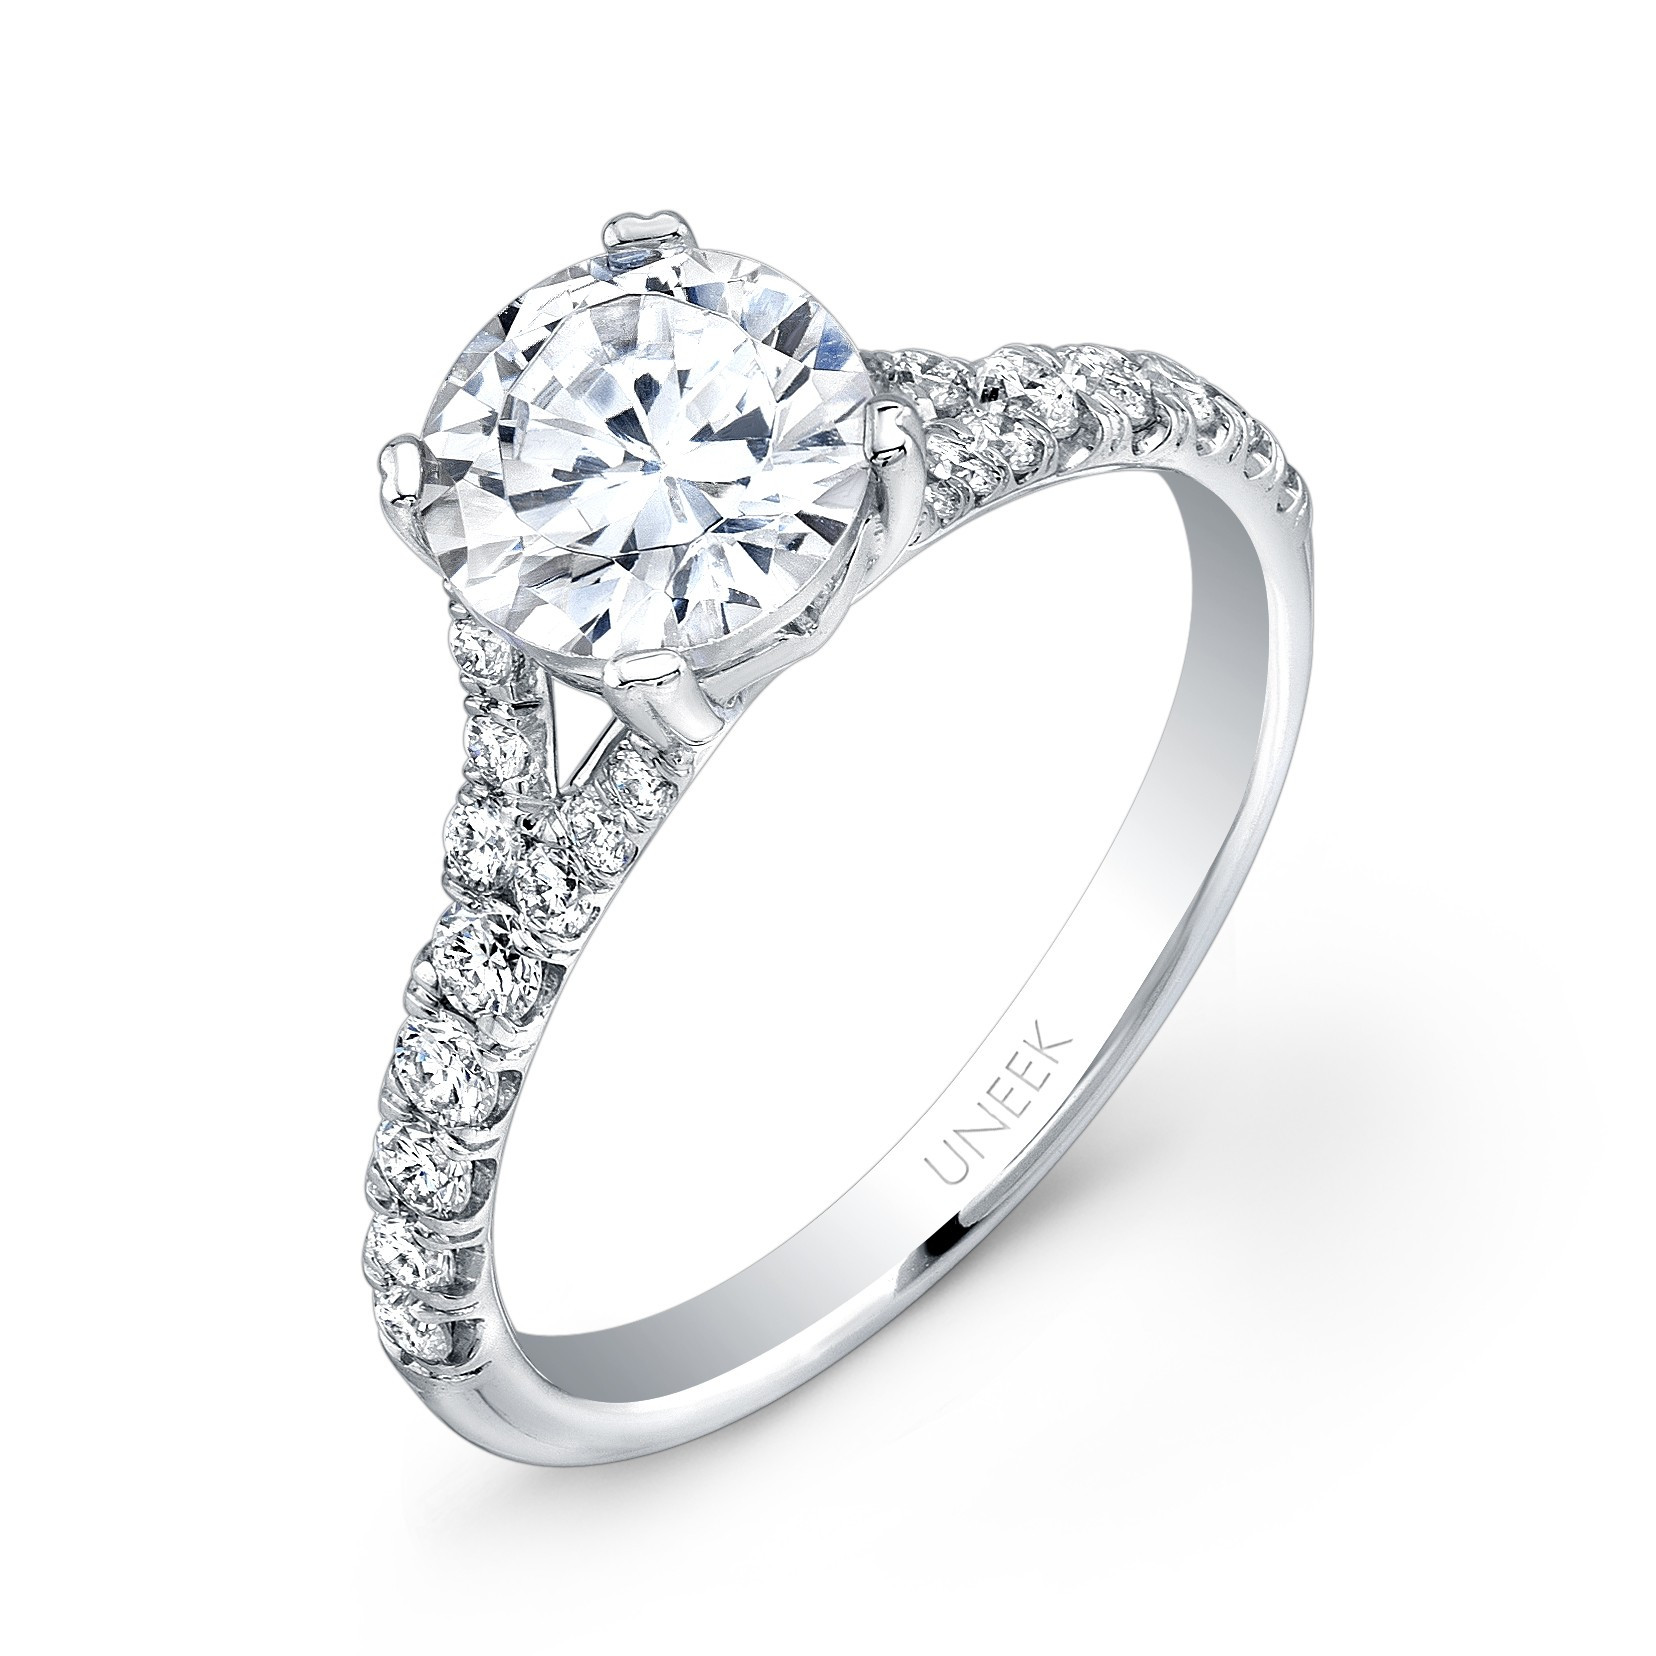 Round Solitaire Diamond Engagement Rings
 Uneek Contemporary Round Diamond Solitaire Engagement Ring